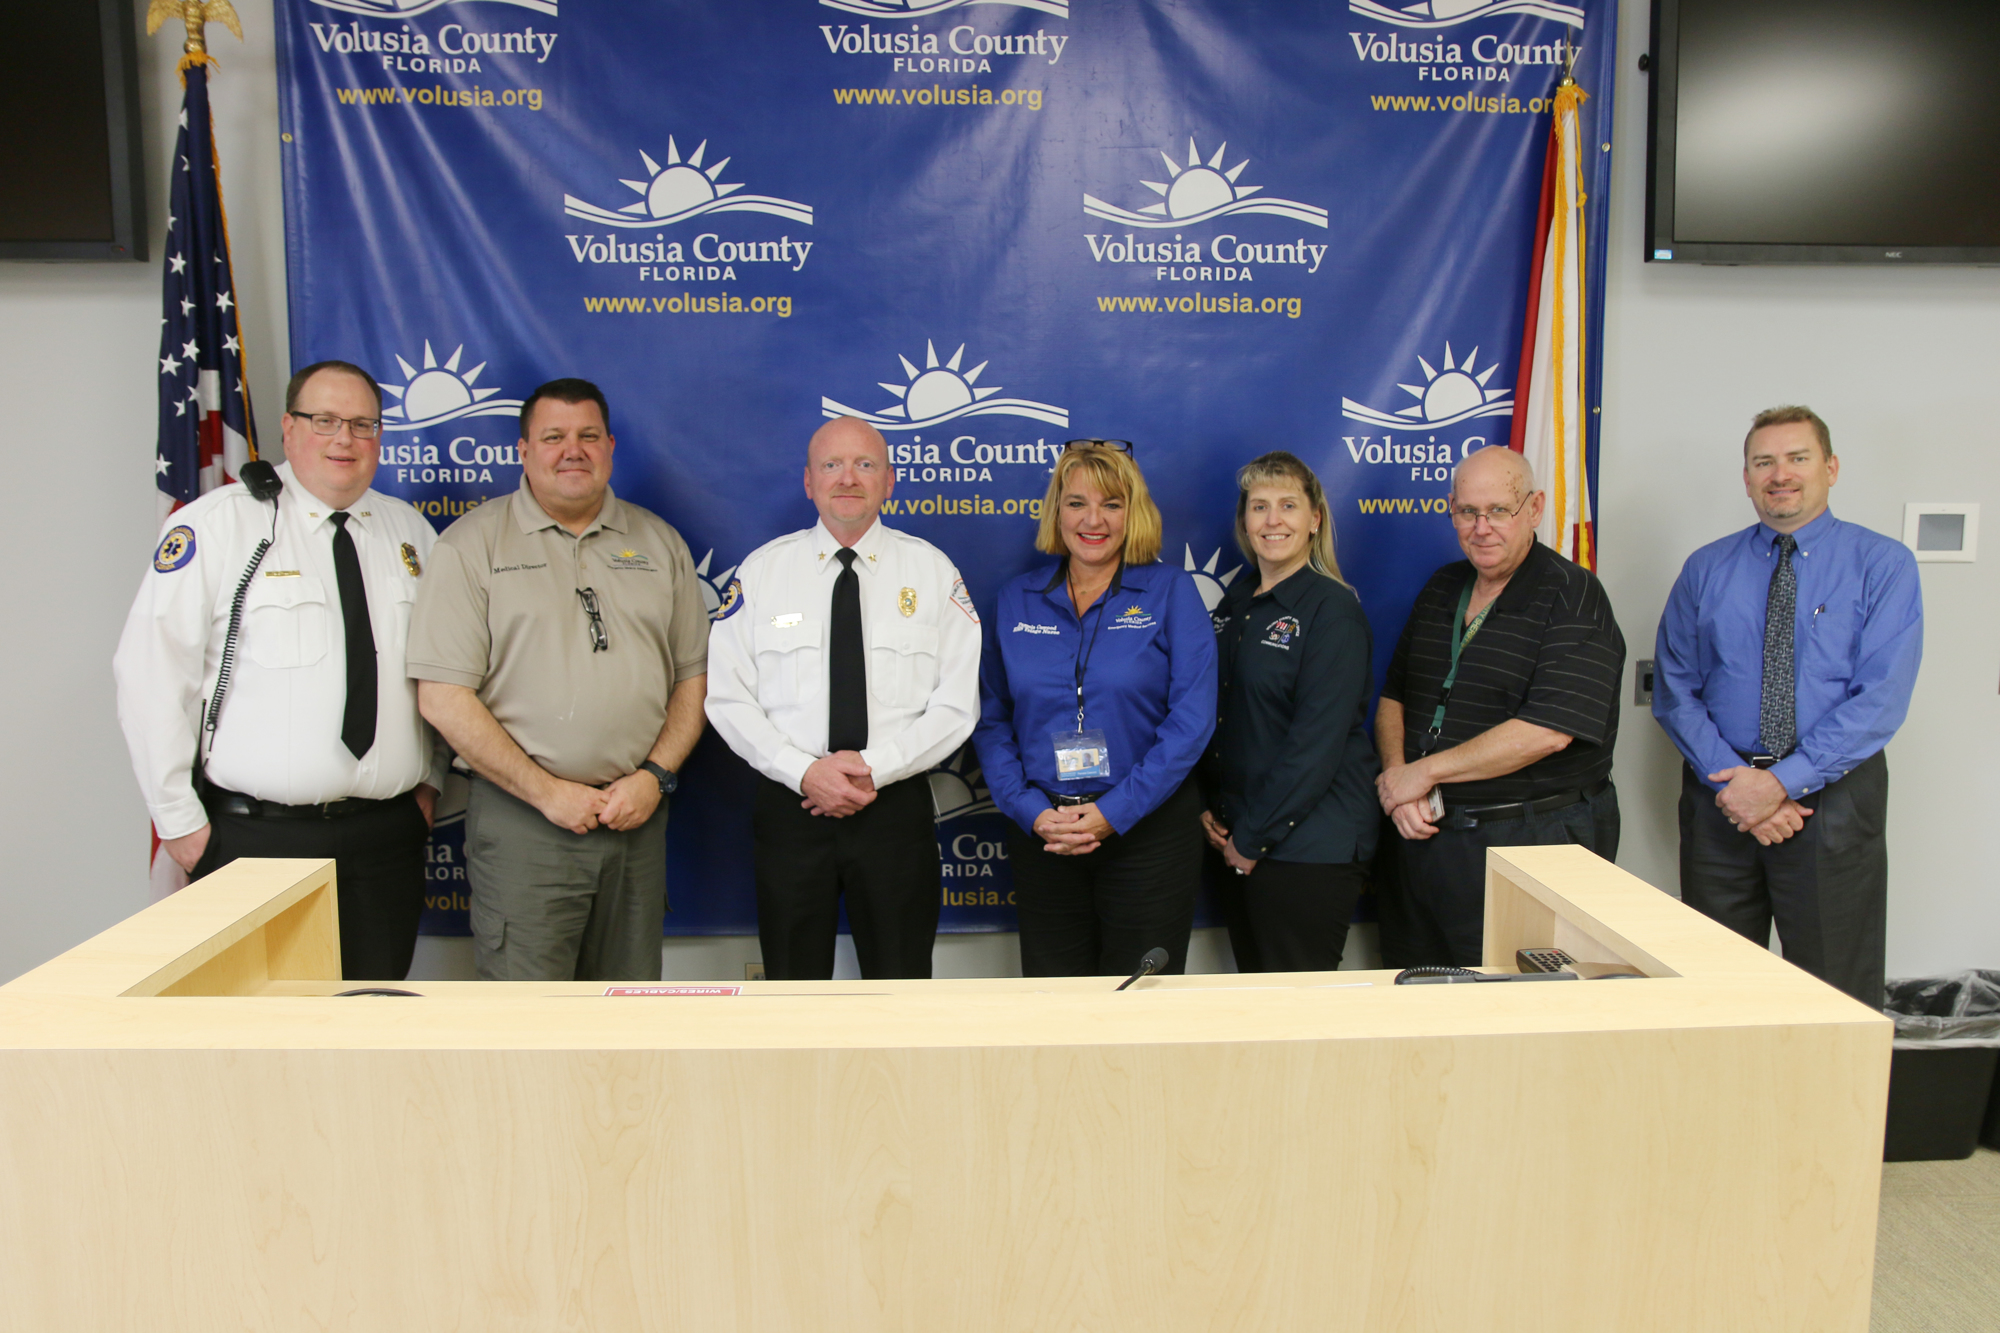 EMS Clinical Services Manager Michael Vincent, Medical Director Peter Springer, EMS Director Jason Brady, Lead Triage Nurse Pam Cawood, Debbie Rego and Glenn Lopez of VCSO Communications,PIO Kevin Captain.Photo by Jarleene Almenas